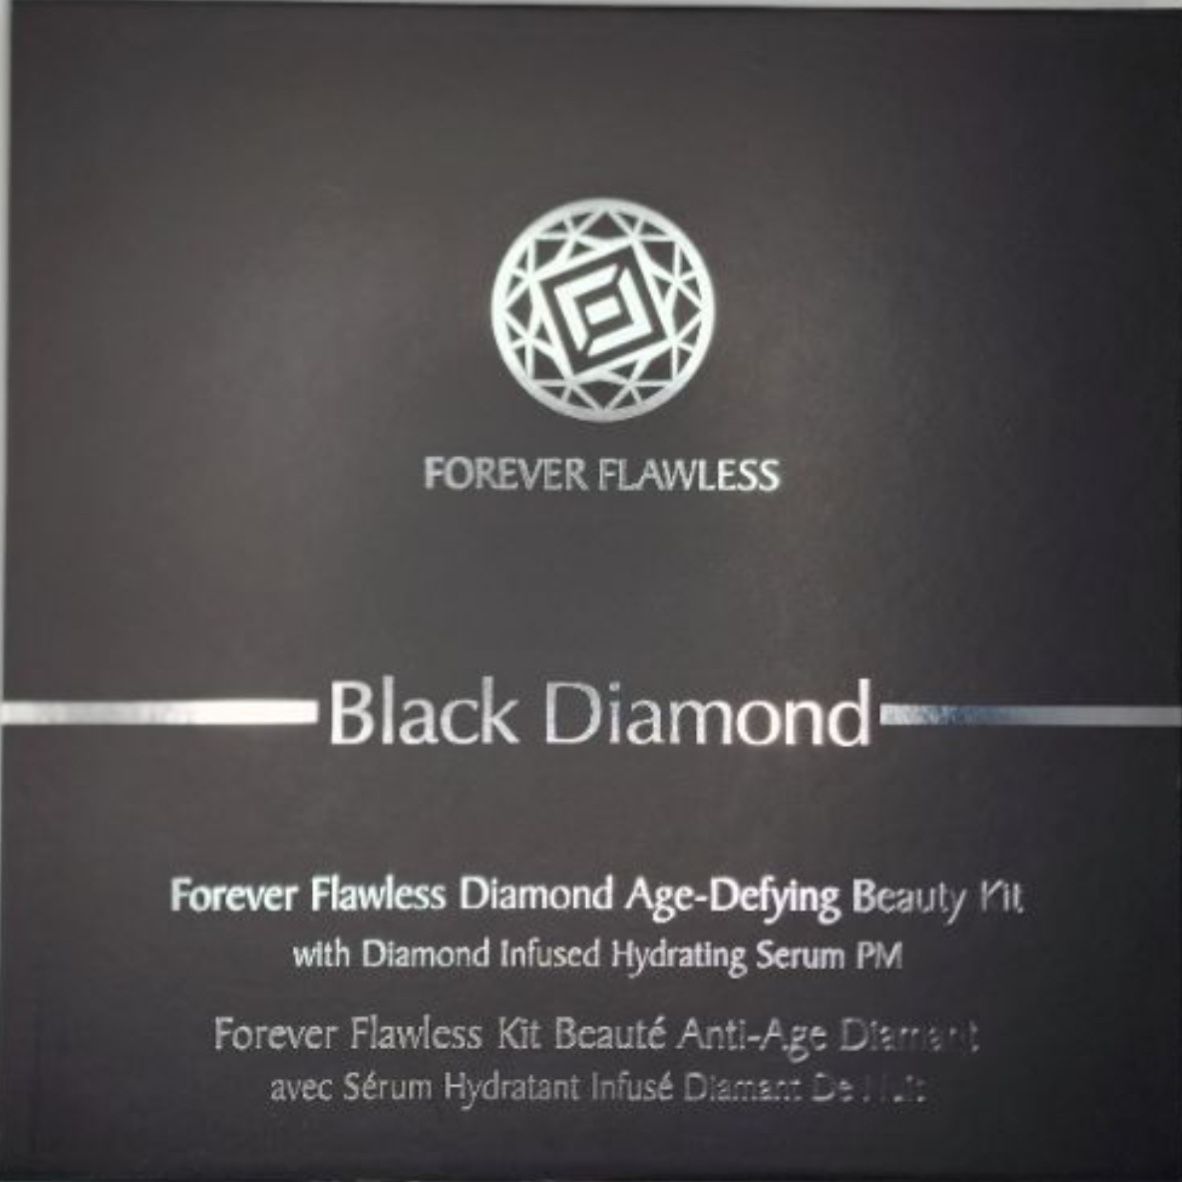 Forever Flawless Black Diamond Beauty Kit (Price Reduced!)